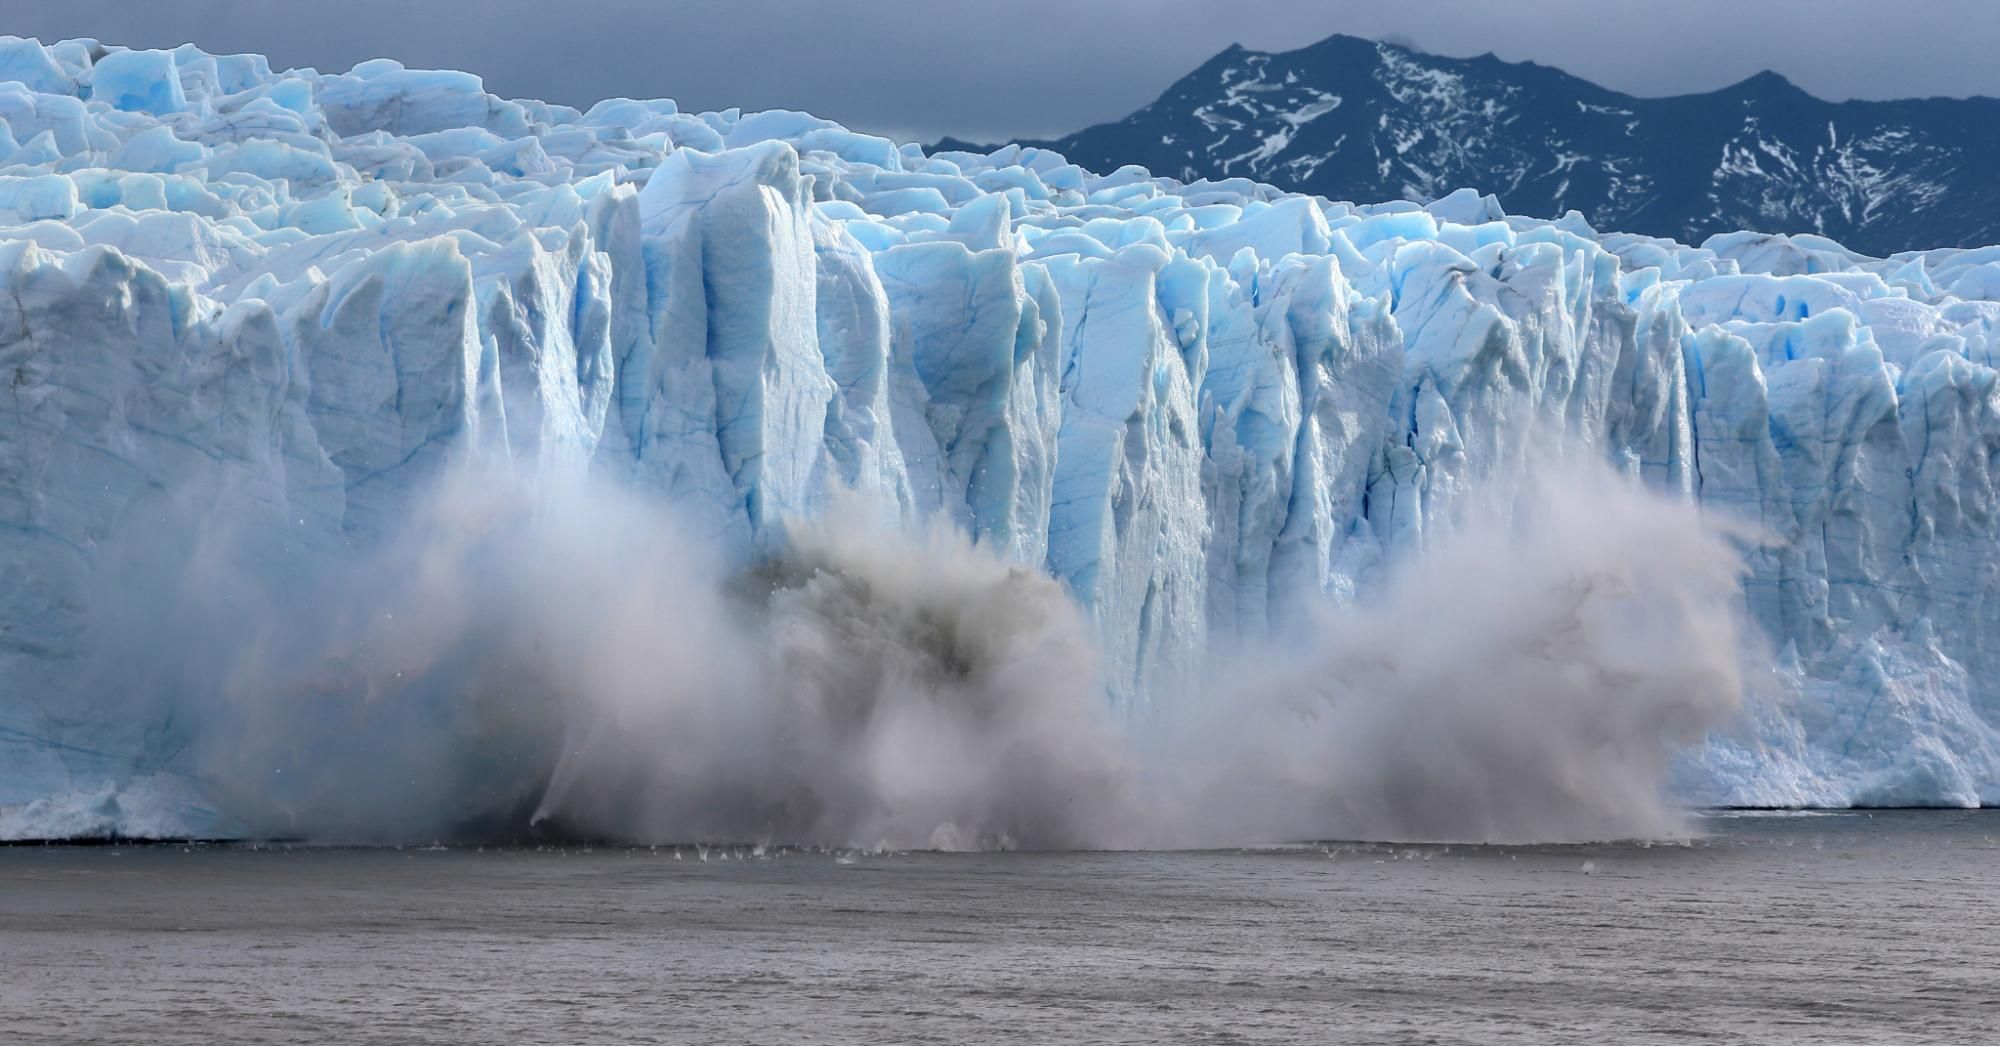 A piece of the Perito Moreno glacier, part of the Southern Patagonian Ice Field, breaks off and crashes into Lake Argentina in the Los Glaciares National Park on April 5, 2019 in Santa Cruz province, Argentina. (Photo: David Silverman via Getty Images)